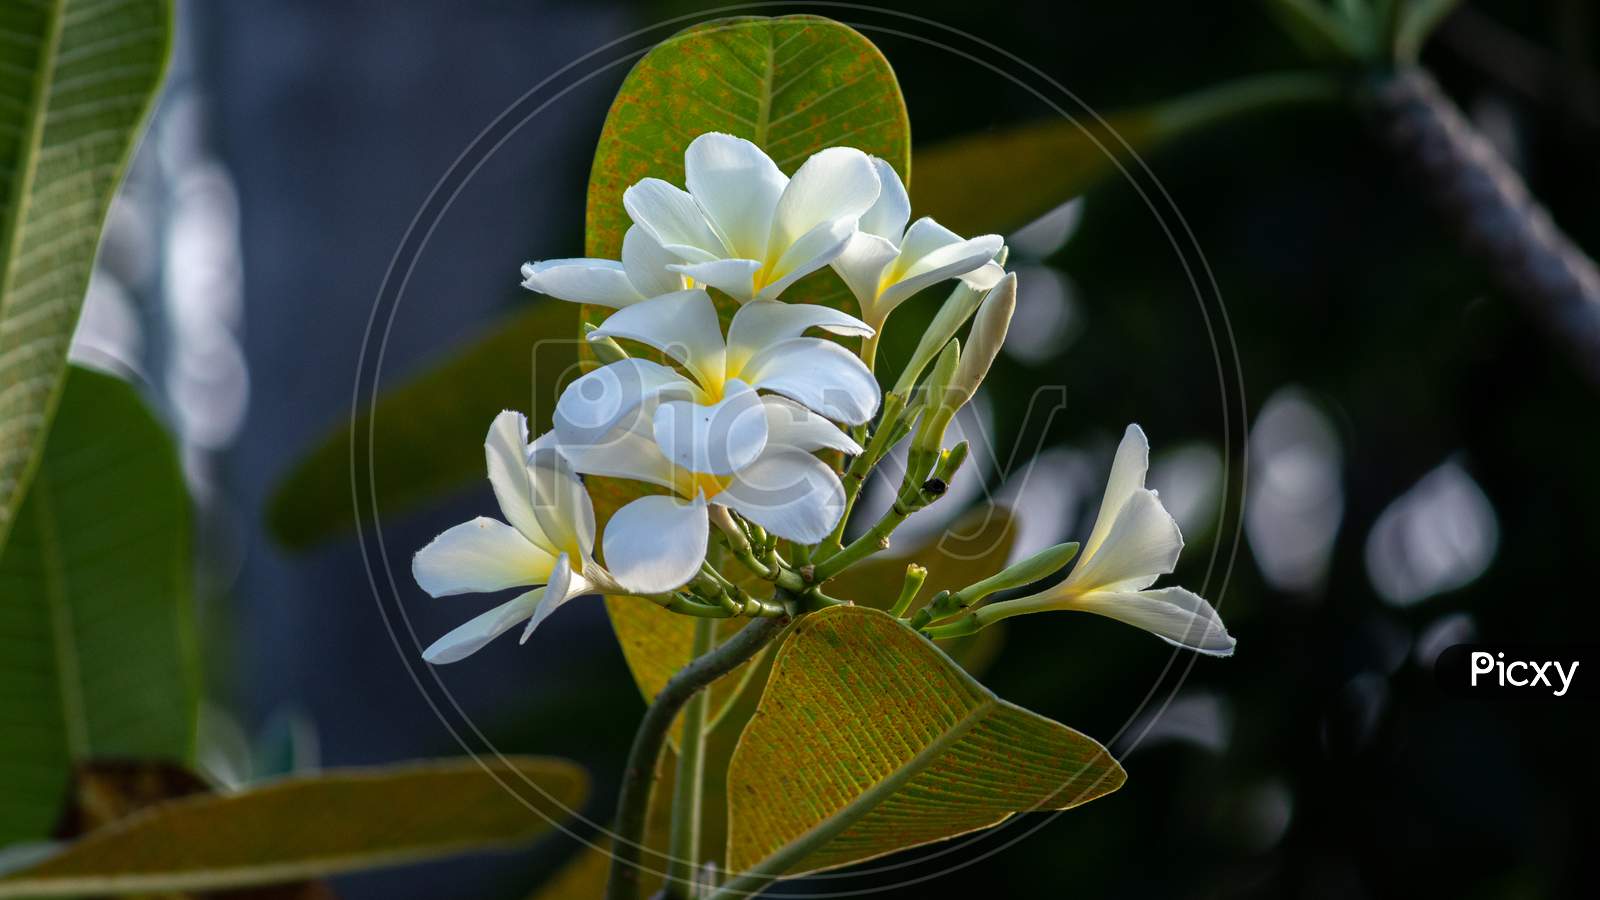 White And Yellow Plumeria Flowers, Great Smelling Flowers In The Nature.